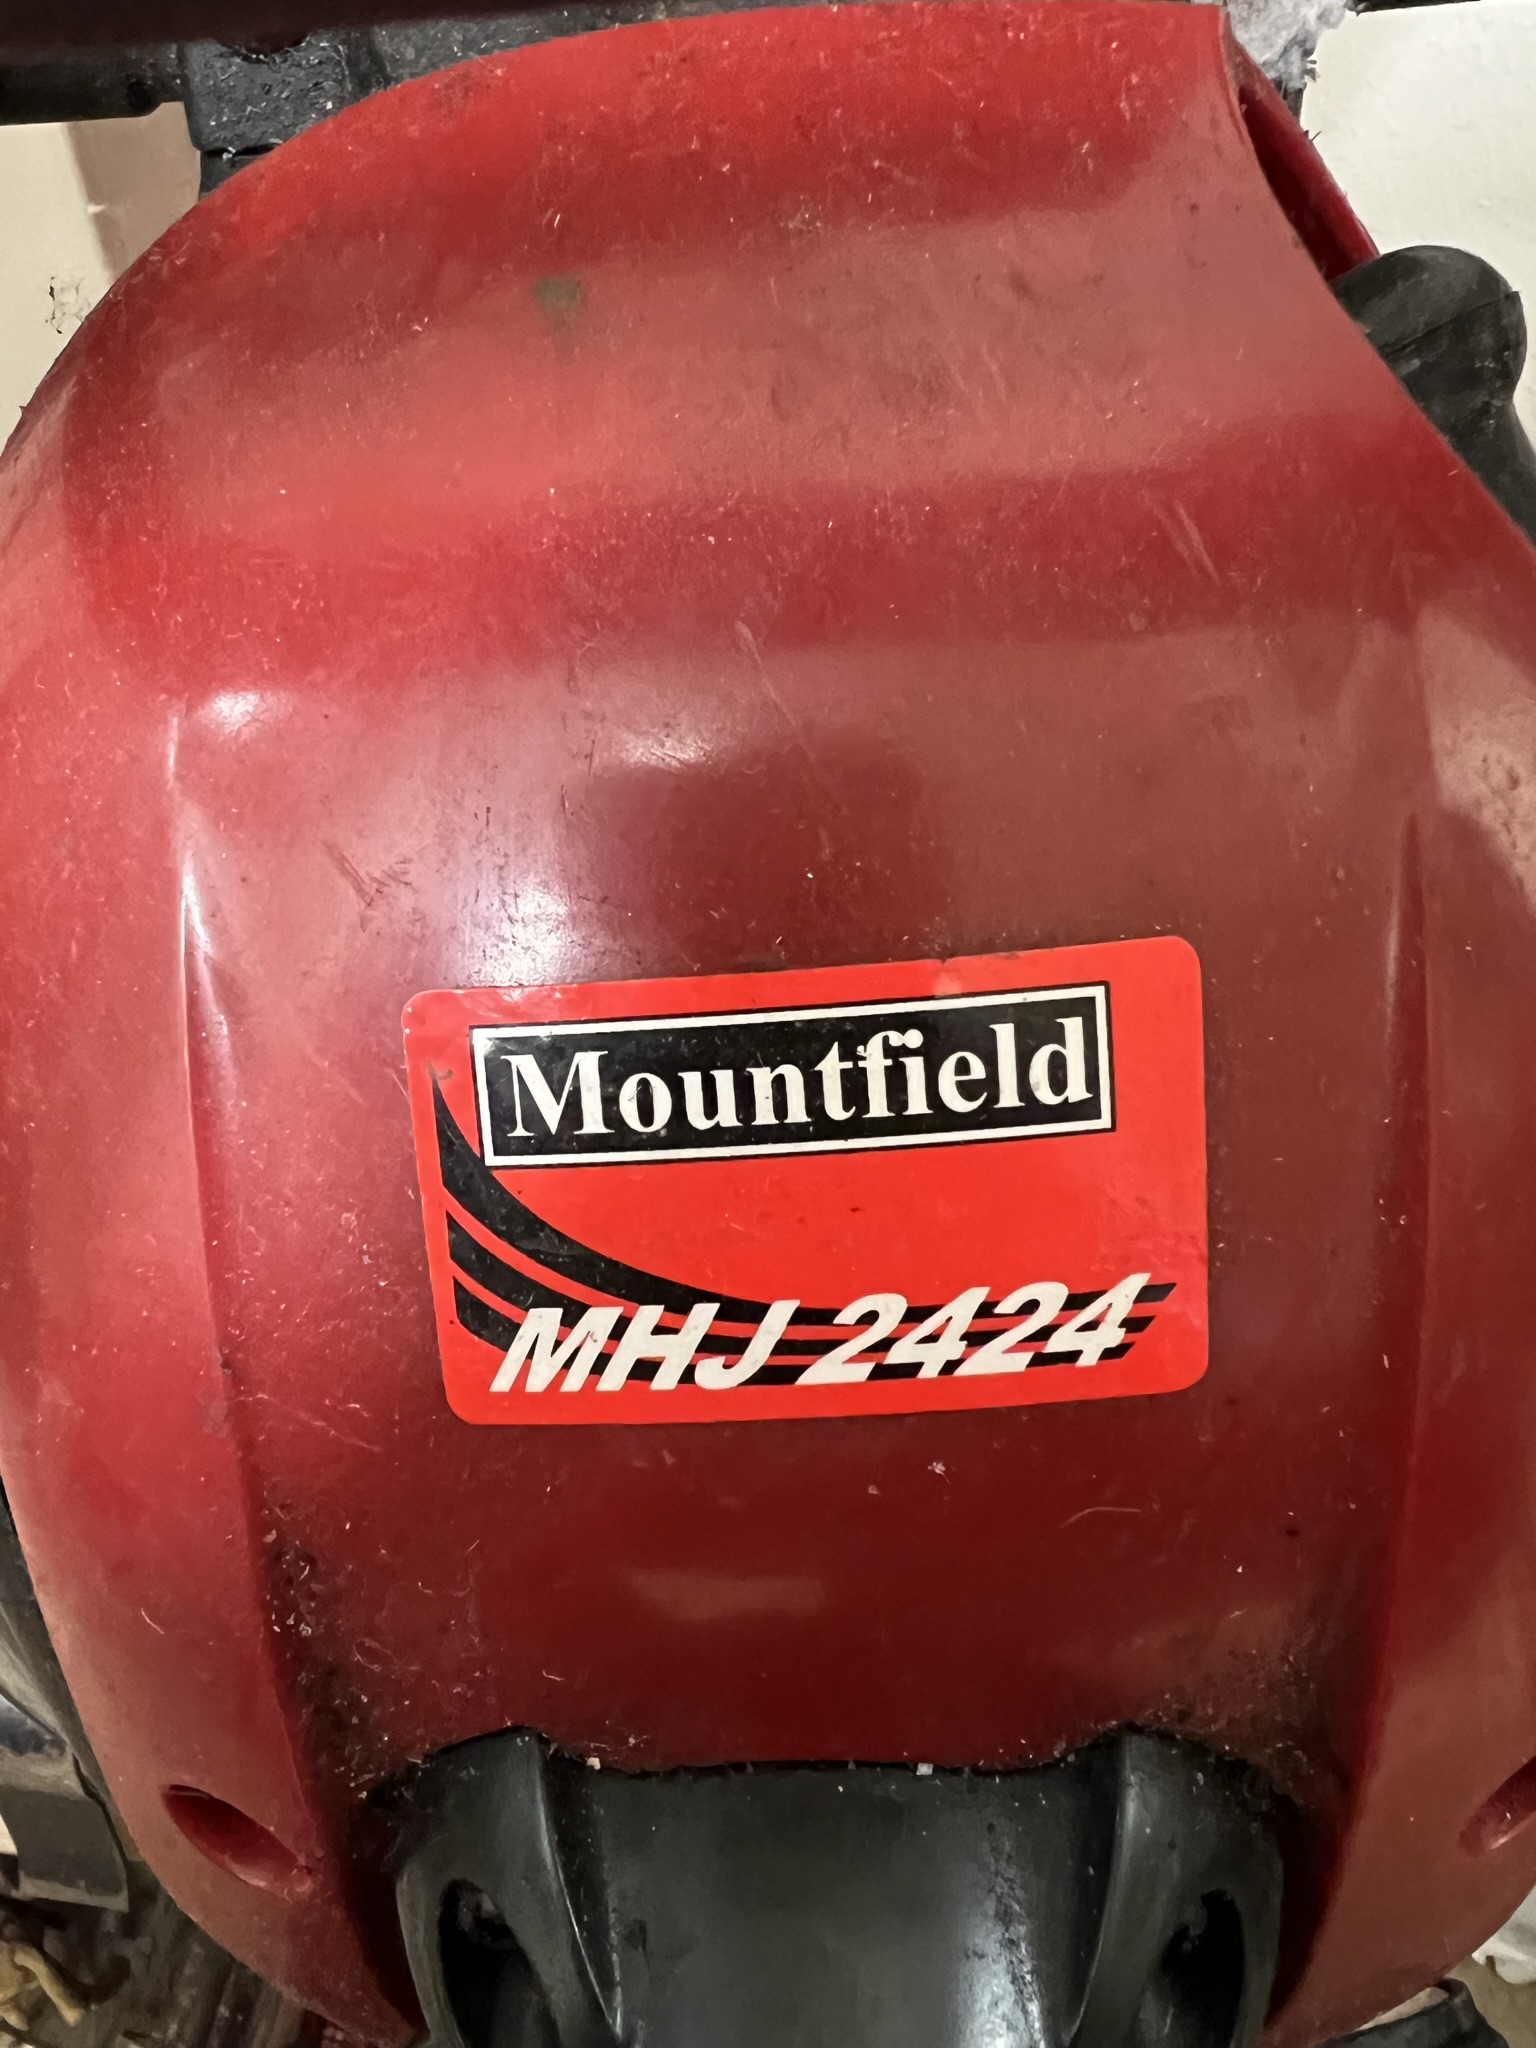 A Mountfield MHJ 2424 petrol hedge trimmer together with another hedge cutter and a coronation - Image 2 of 2